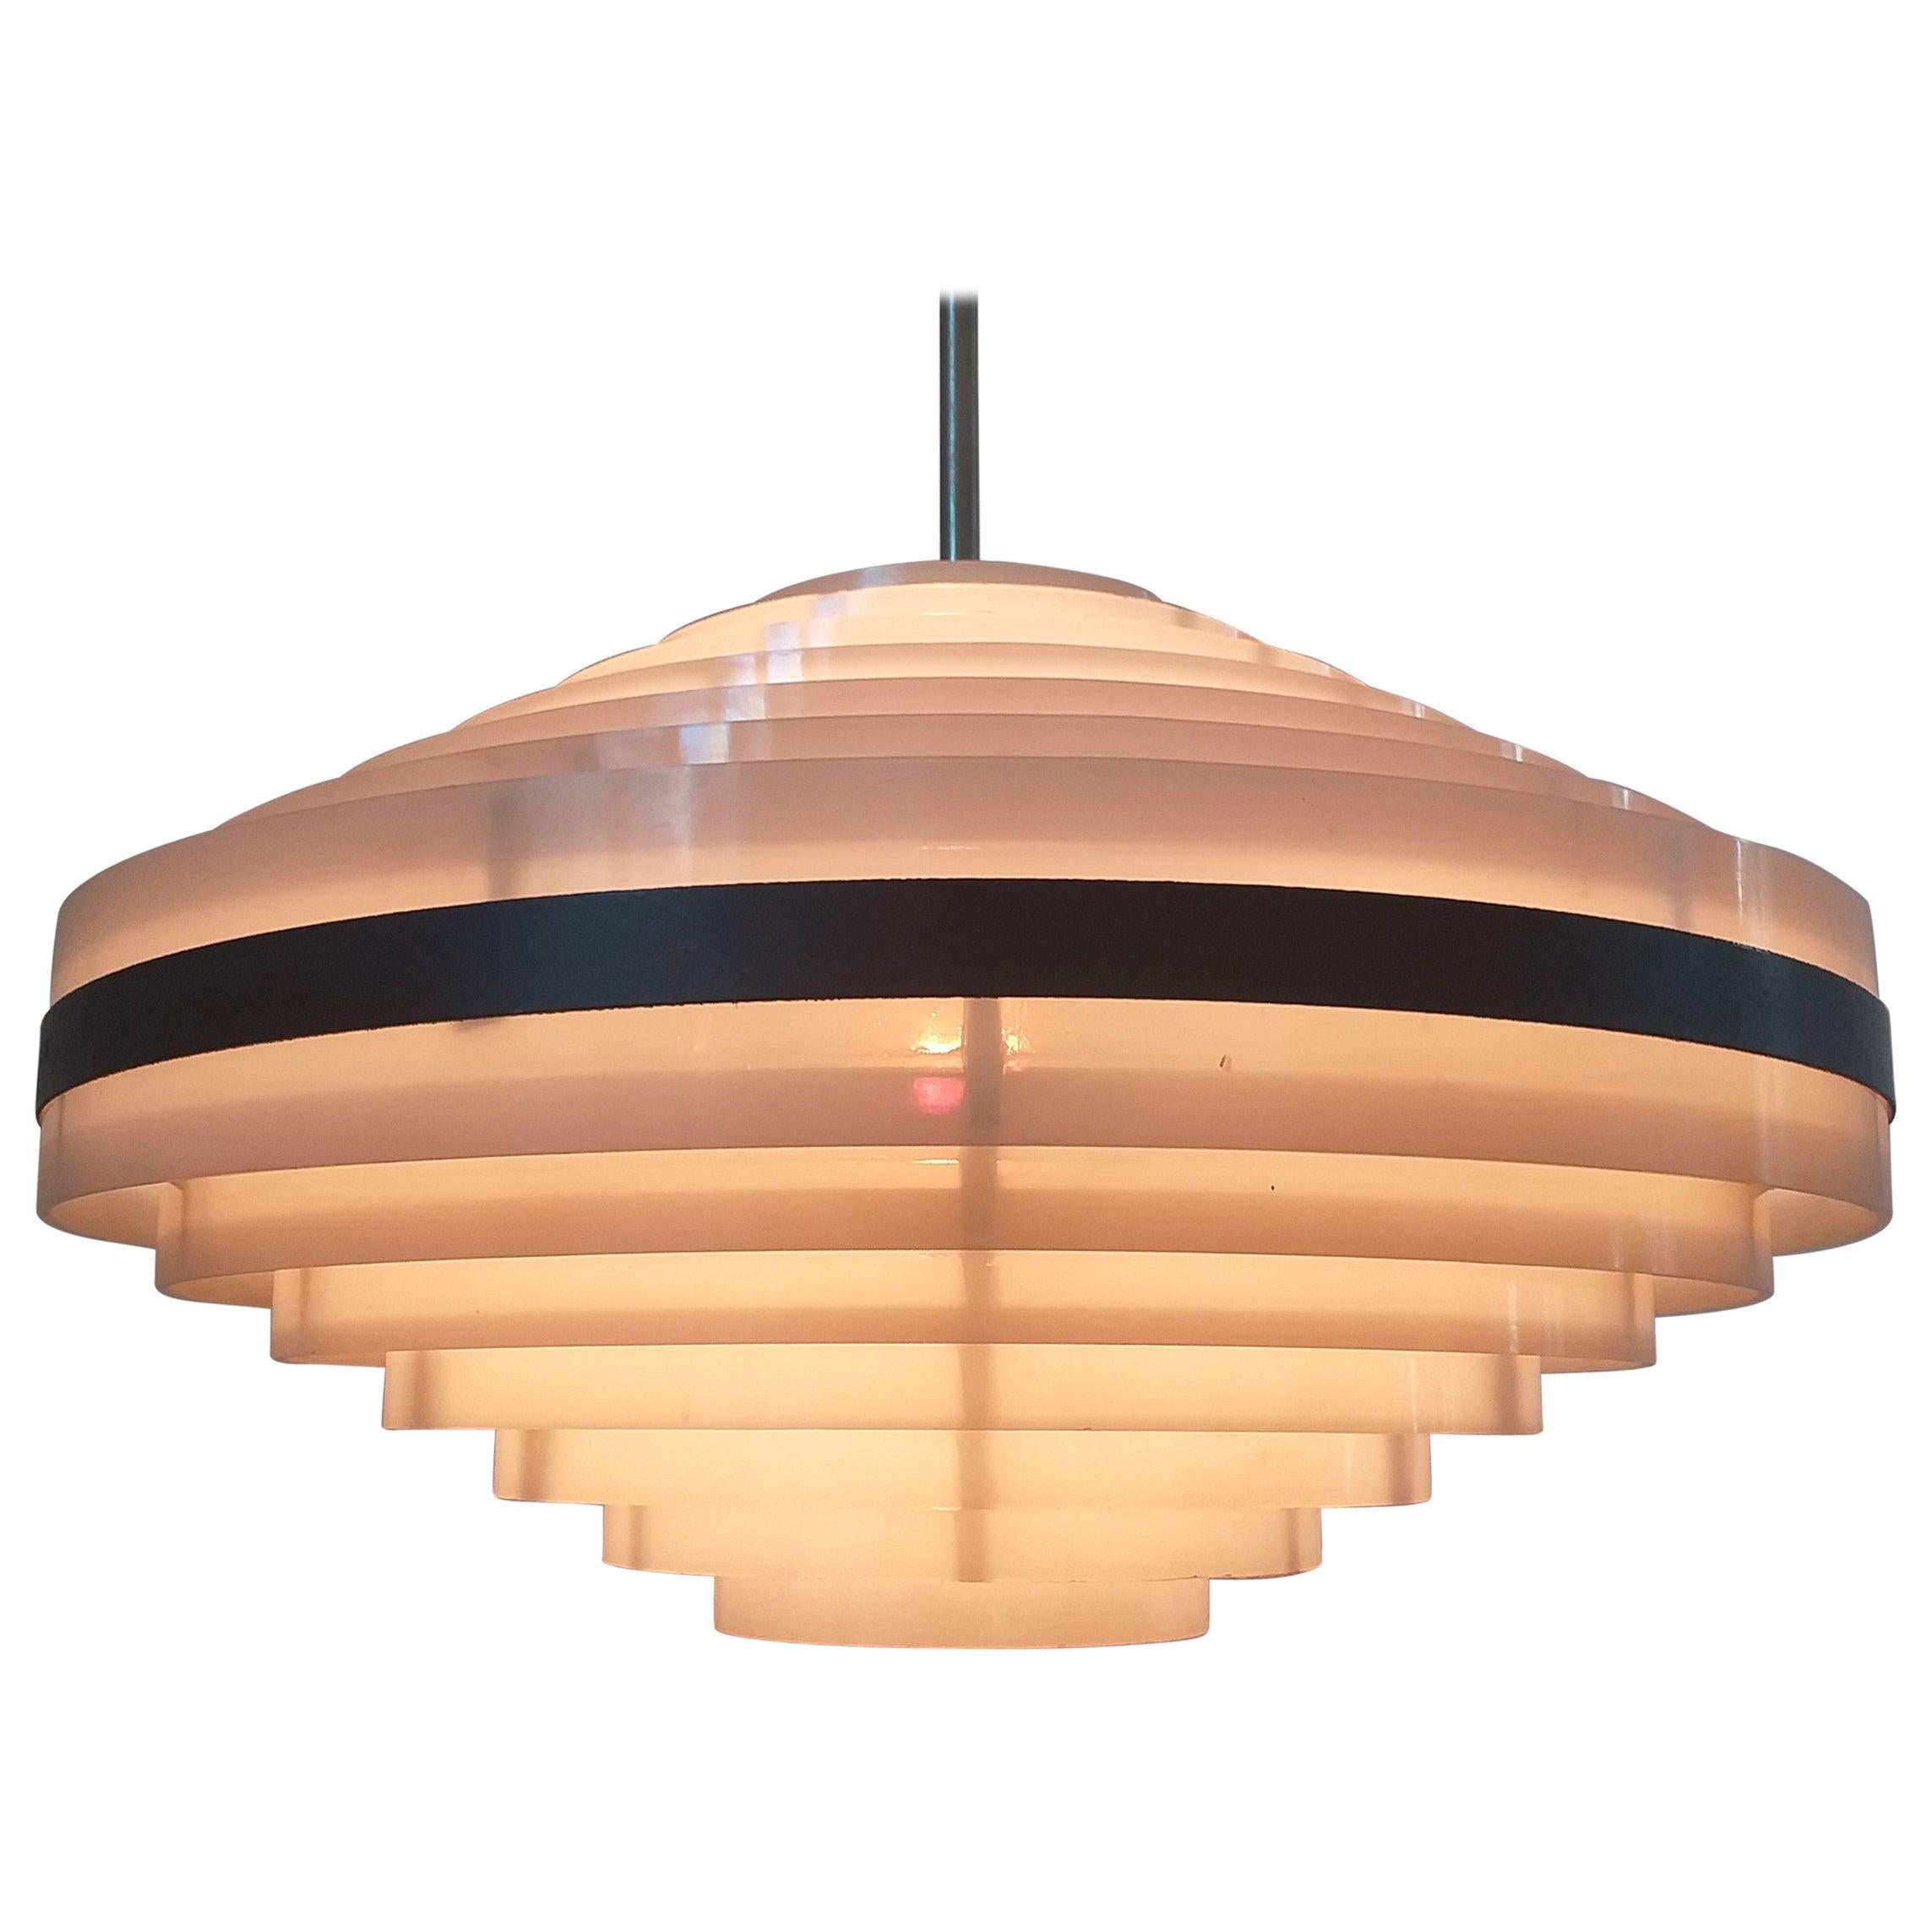 Midcentury Space Age UFO Style Pendant, 1970s / Up to 14 Pieces